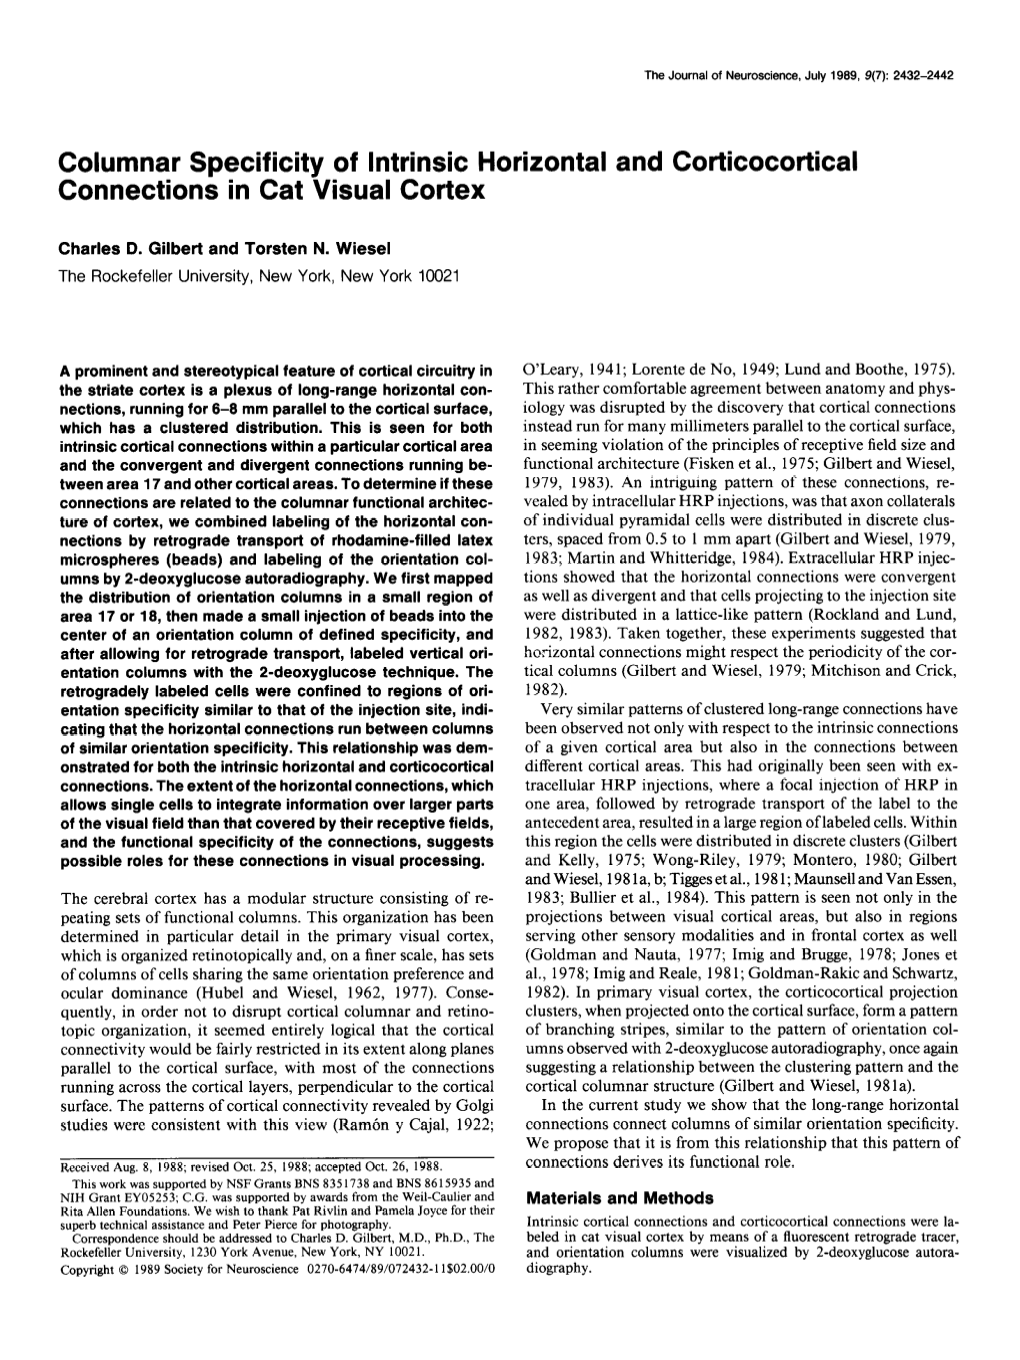 Columnar Specificity of Intrinsic Horizontal and Corticocortical Connections in Cat Visual Cortex